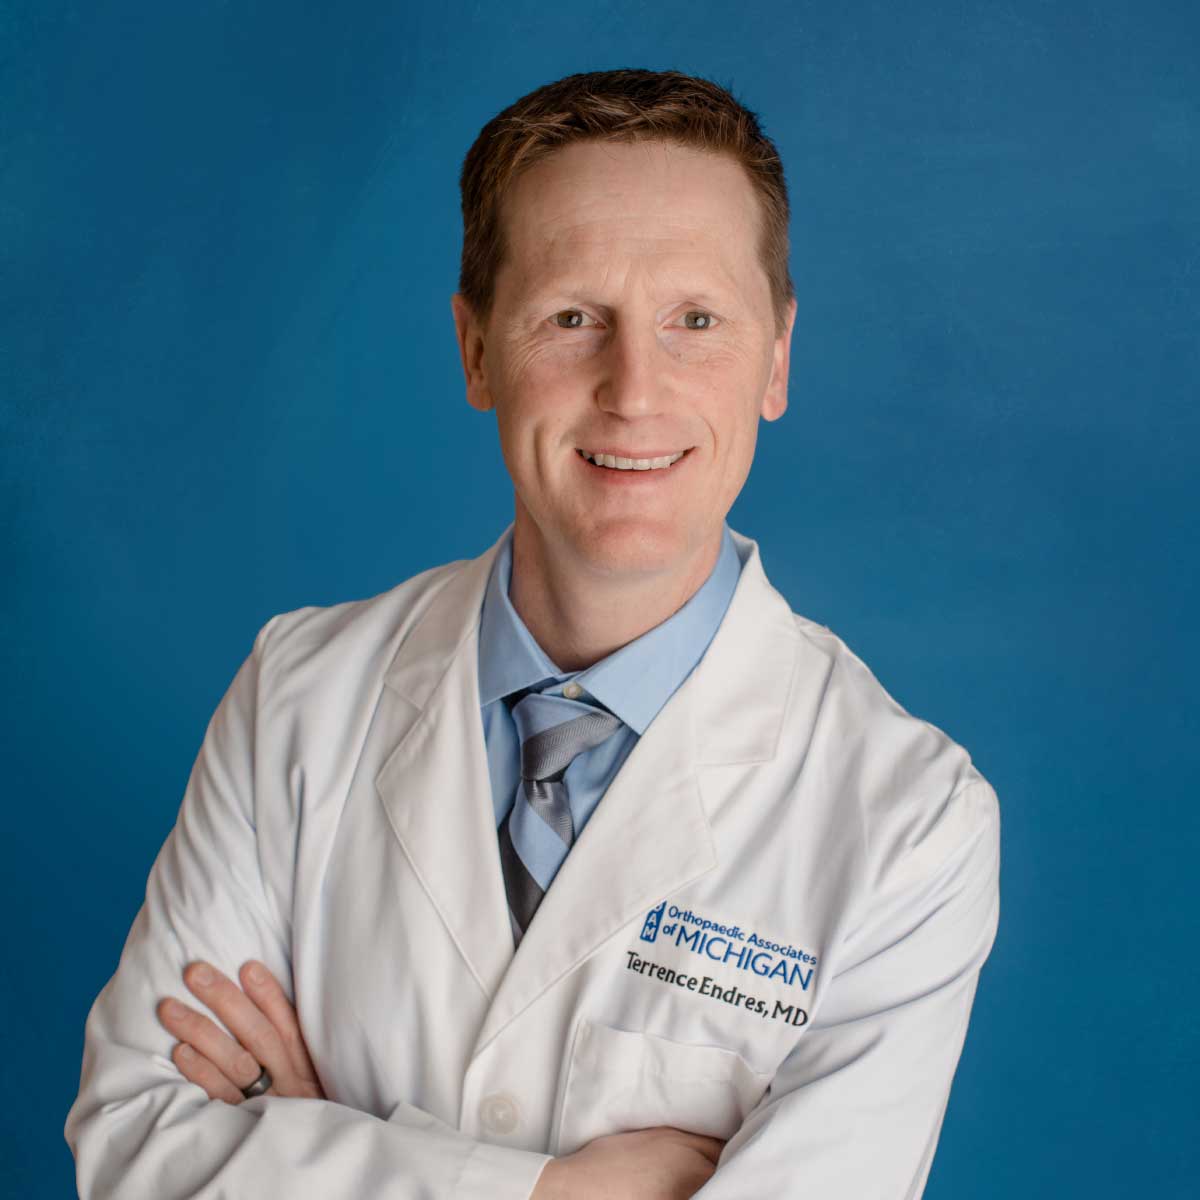 Terrence Endres, MD